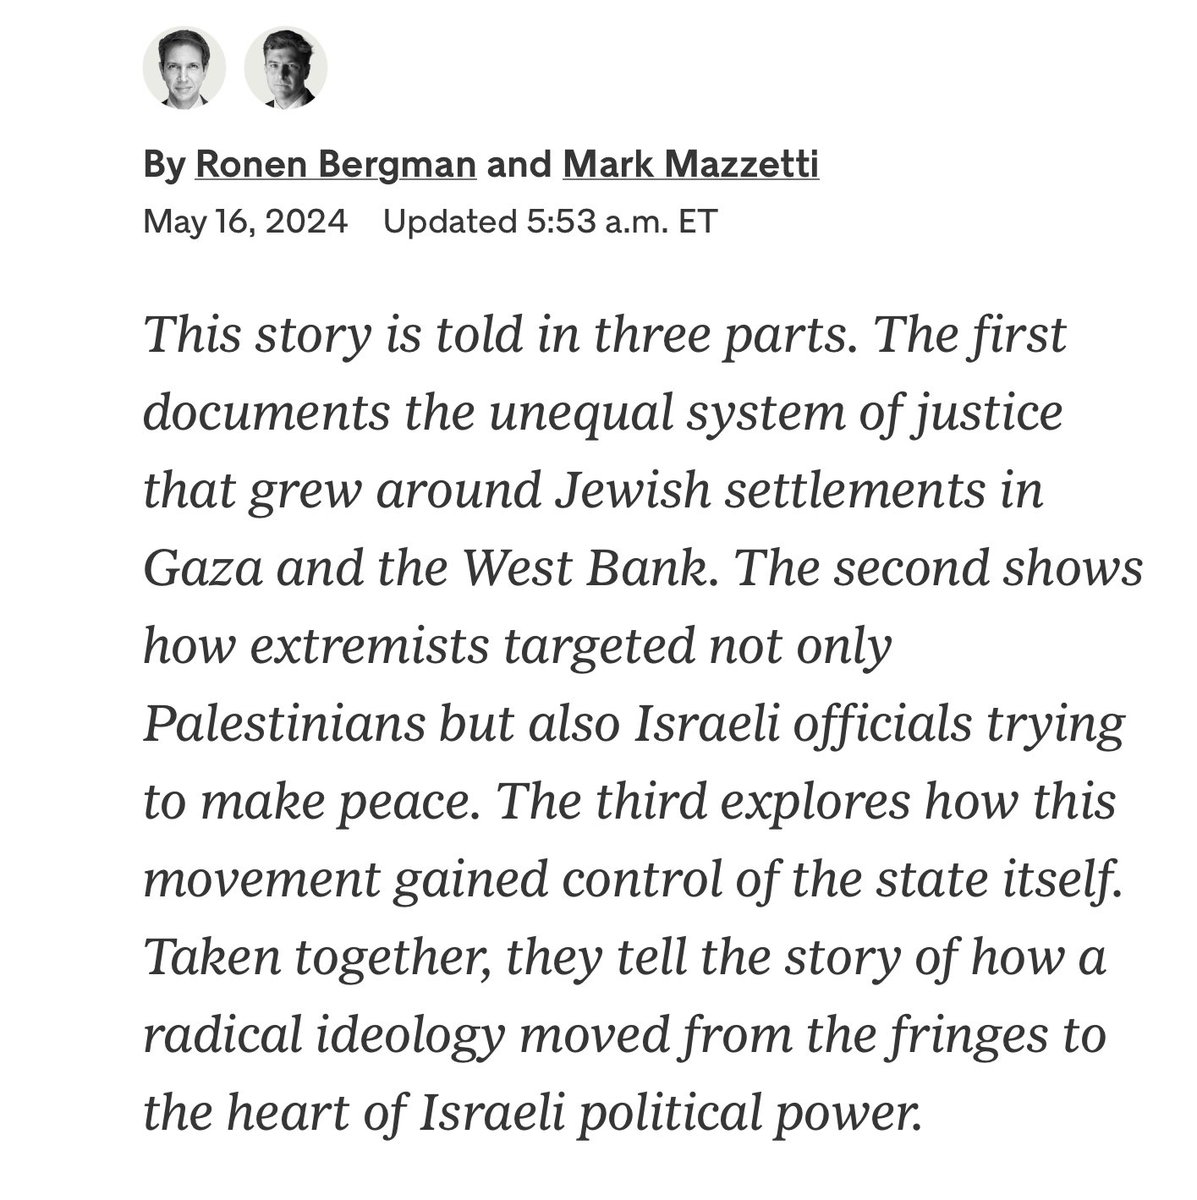 Disturbing deep @nytimes history of how Israel’s radical right-wing religious terrorist fringe led by outlaw West Bank settlers has, over 50 years, moved into the mainstream, wrecked democracy and now taken over the country. The parallels with the U.S. right are chilling. 1/2